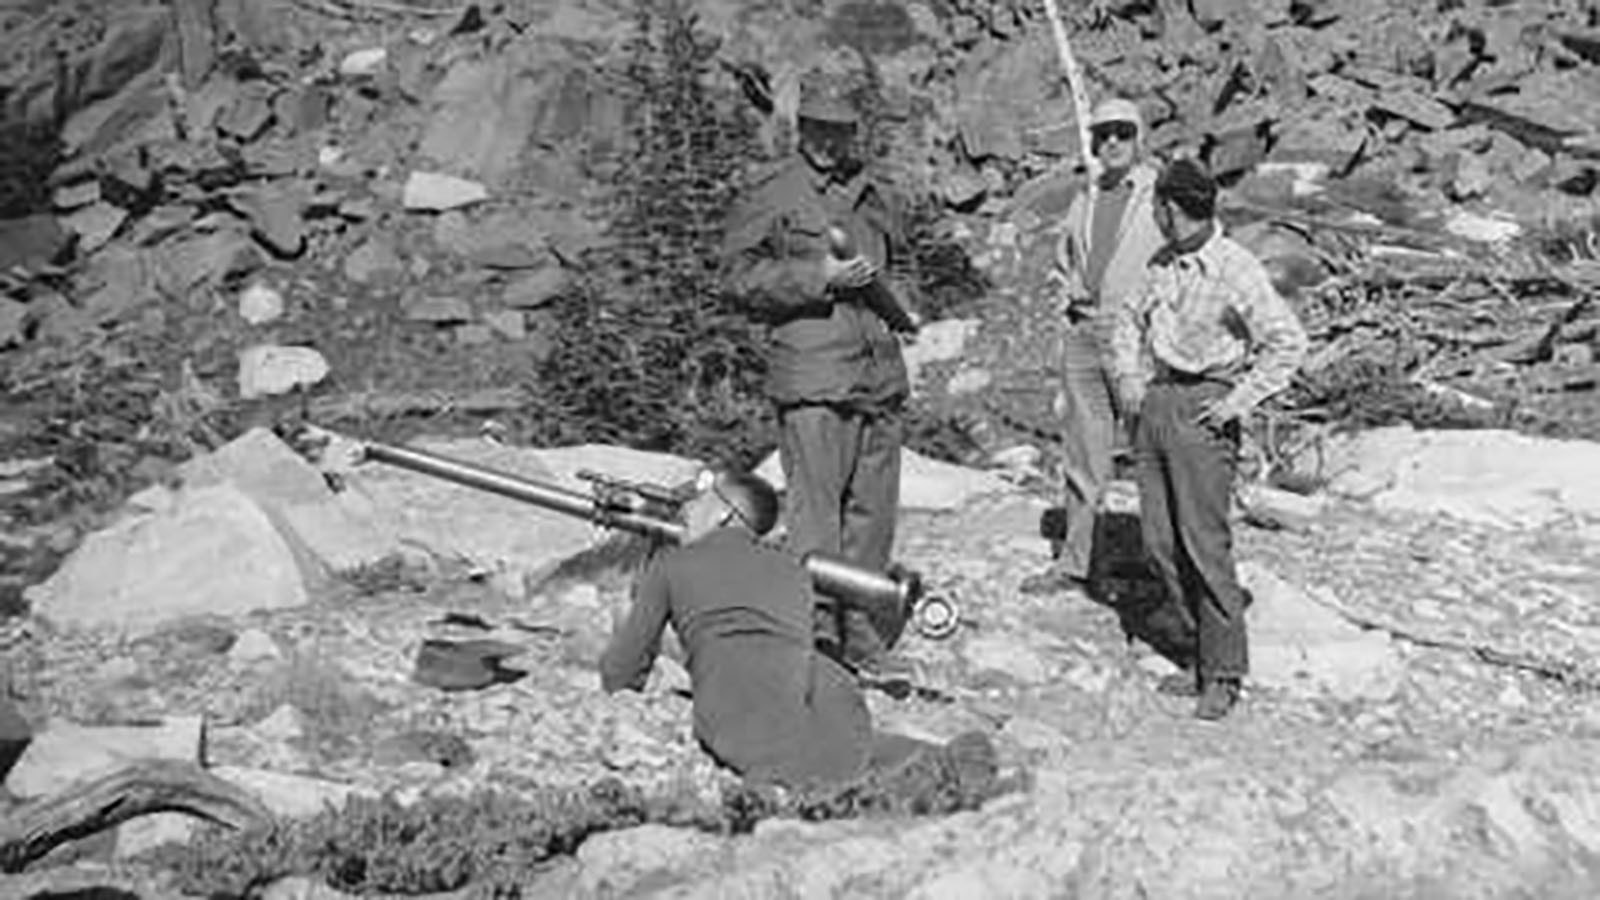 To discourage curiosity seekers soldiers from the Wyoming National Guard used a recoilless rifle to shoot down the wreckage. The soldier standing at center is holding a shell.